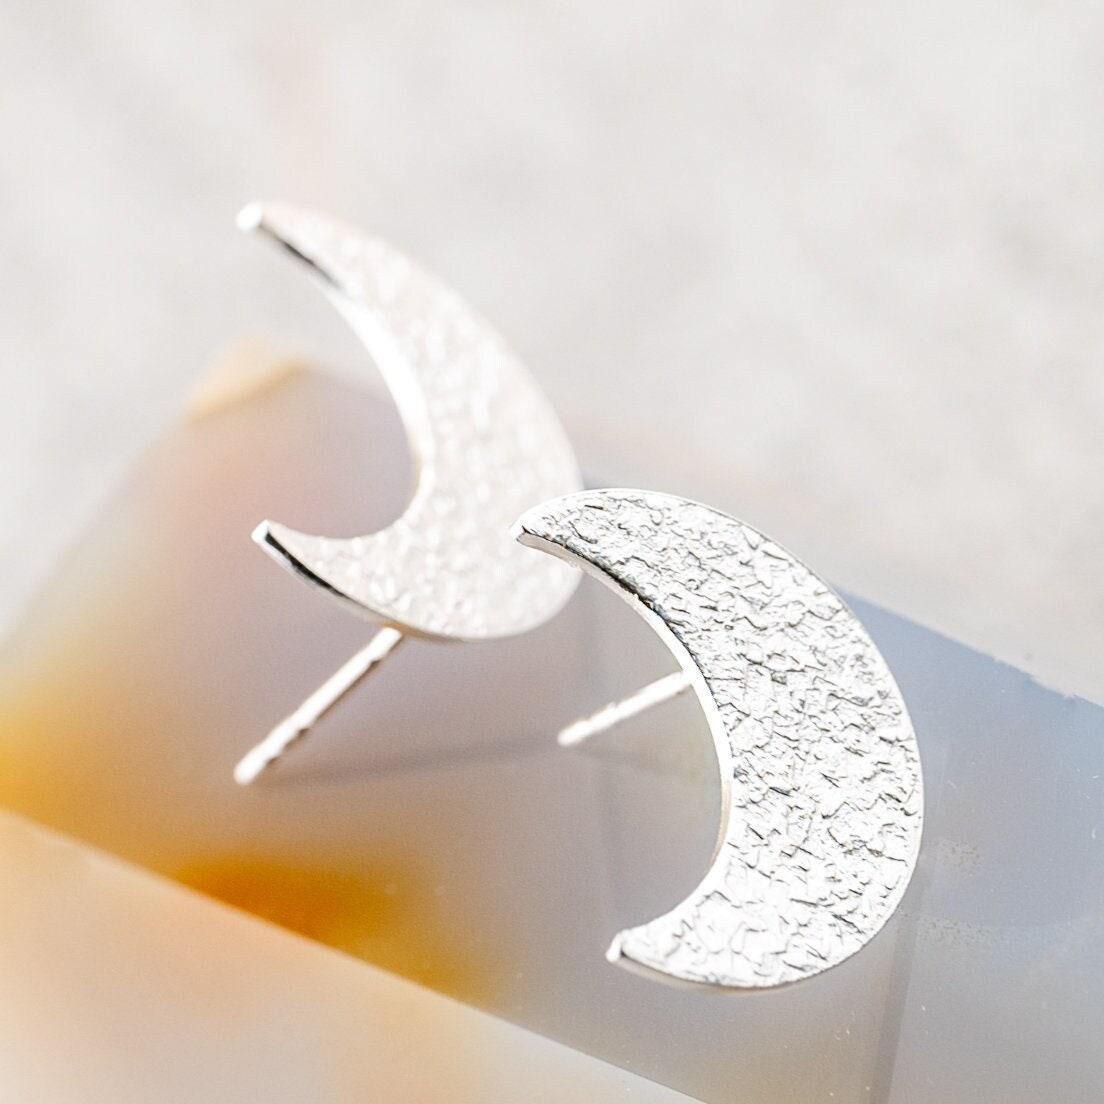 Crescent Moon post stud earrings sterling silver, Lunar celestial moon goddess, You pick the size, gift for her